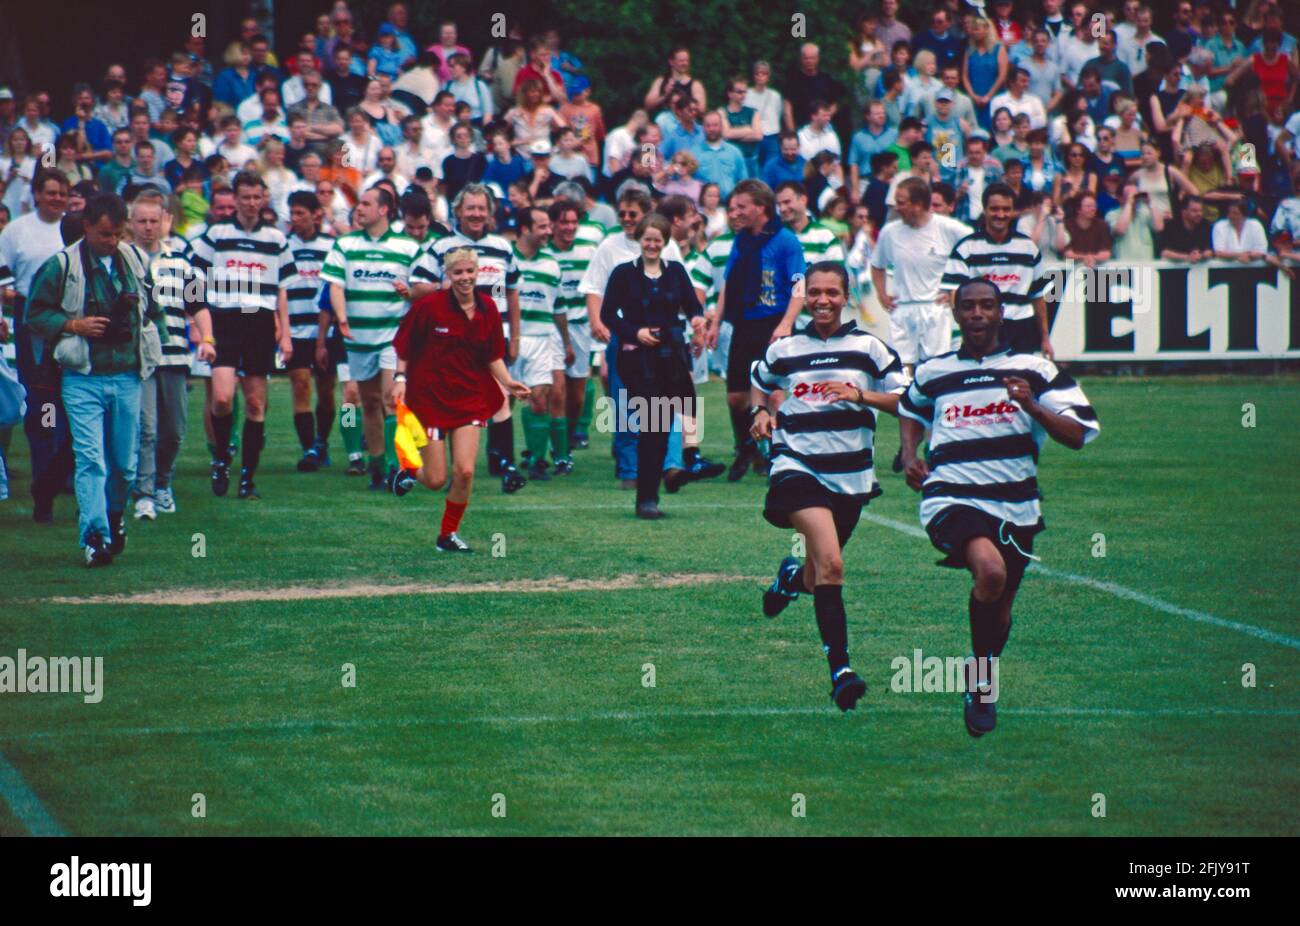 players running onto the field, in the background singer T. of Mr. President, in the front singer Lee of Tic Tac Toe and singer Lazy of Mr. President, on the occasion of a benefit match organised by the sports club LSK, May 17, 1998, Lüneburg, Lower Saxony, Germany Stock Photo